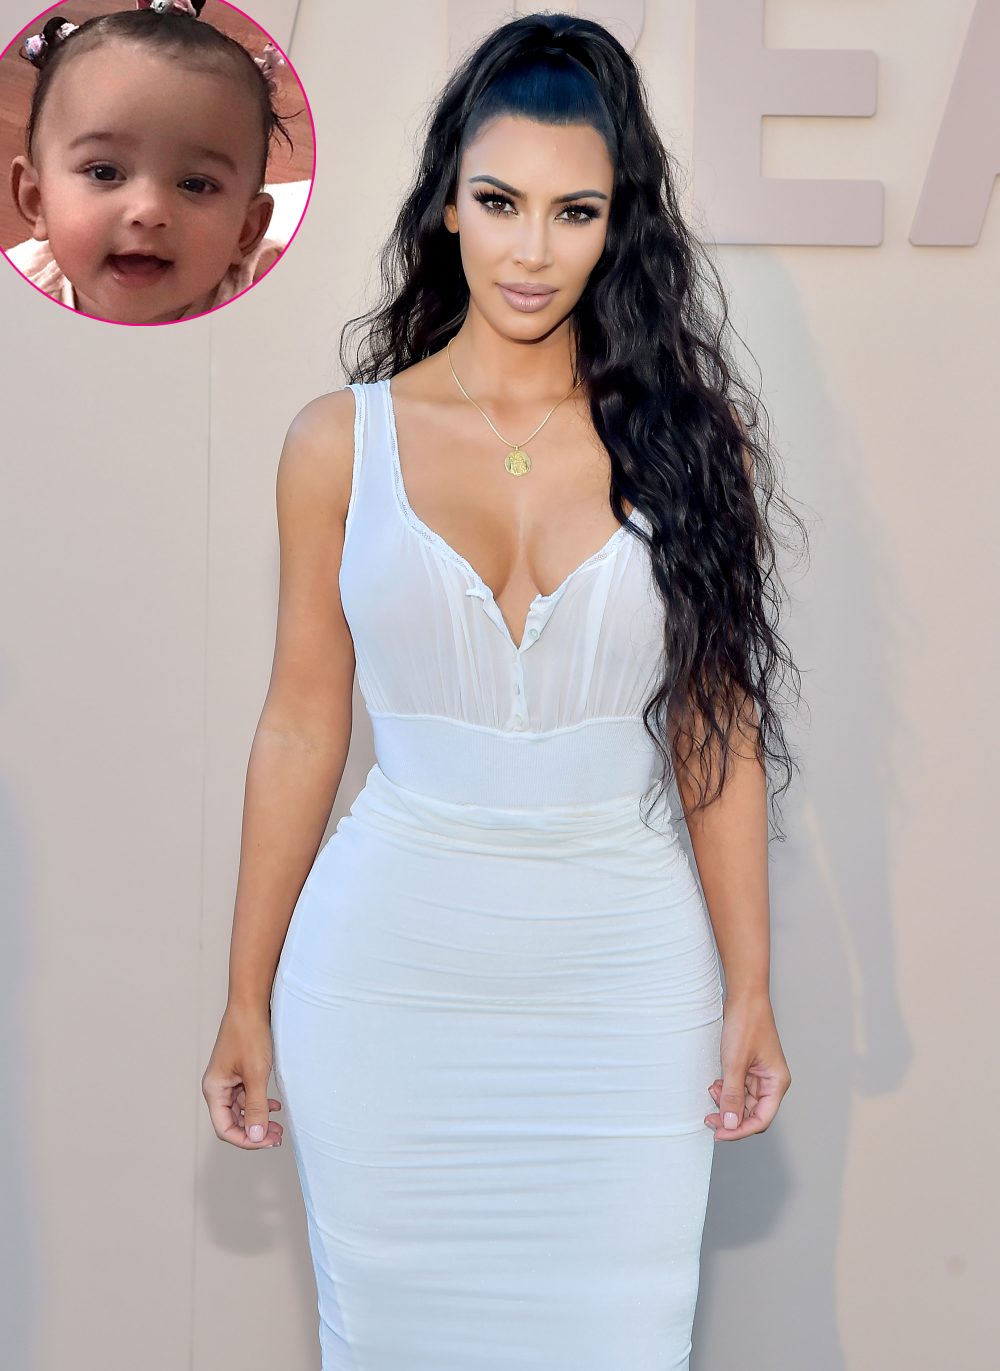 Kim Kardashian Gushes Over 'Sweetest Baby in the Entire World' Chicago on Her 1st Birthday